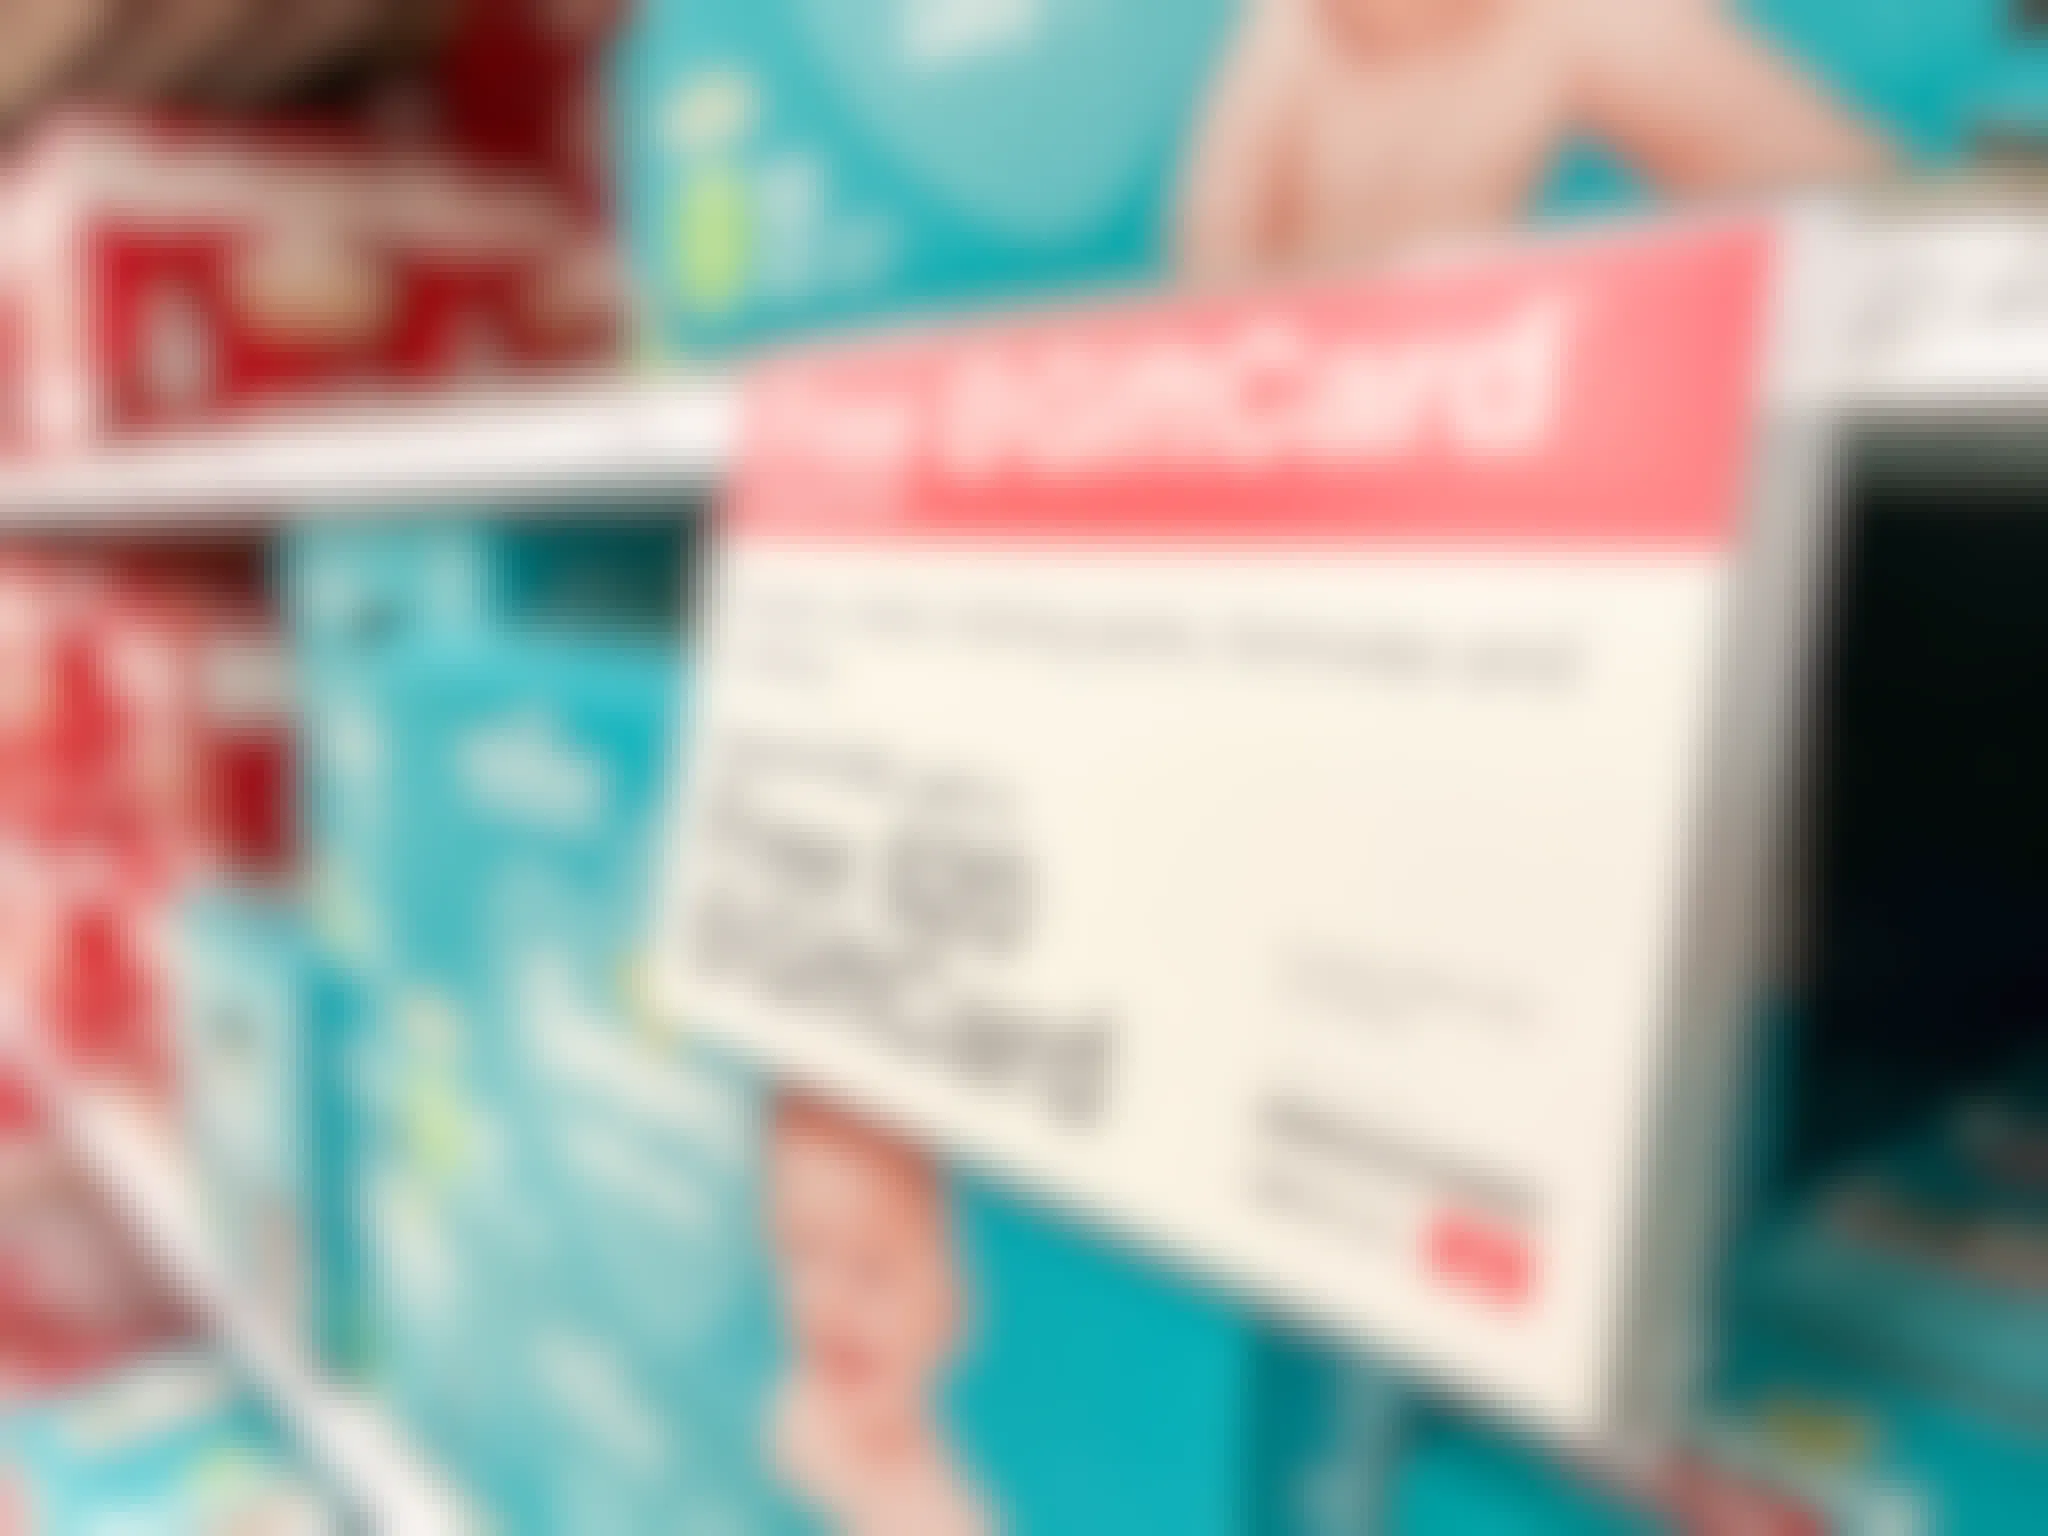 A shelf filled with pampers baby diapers with a sign that says Free Target Gift Card with $100 purchases of diapers, wipes, training pants, formulas, and toiletries